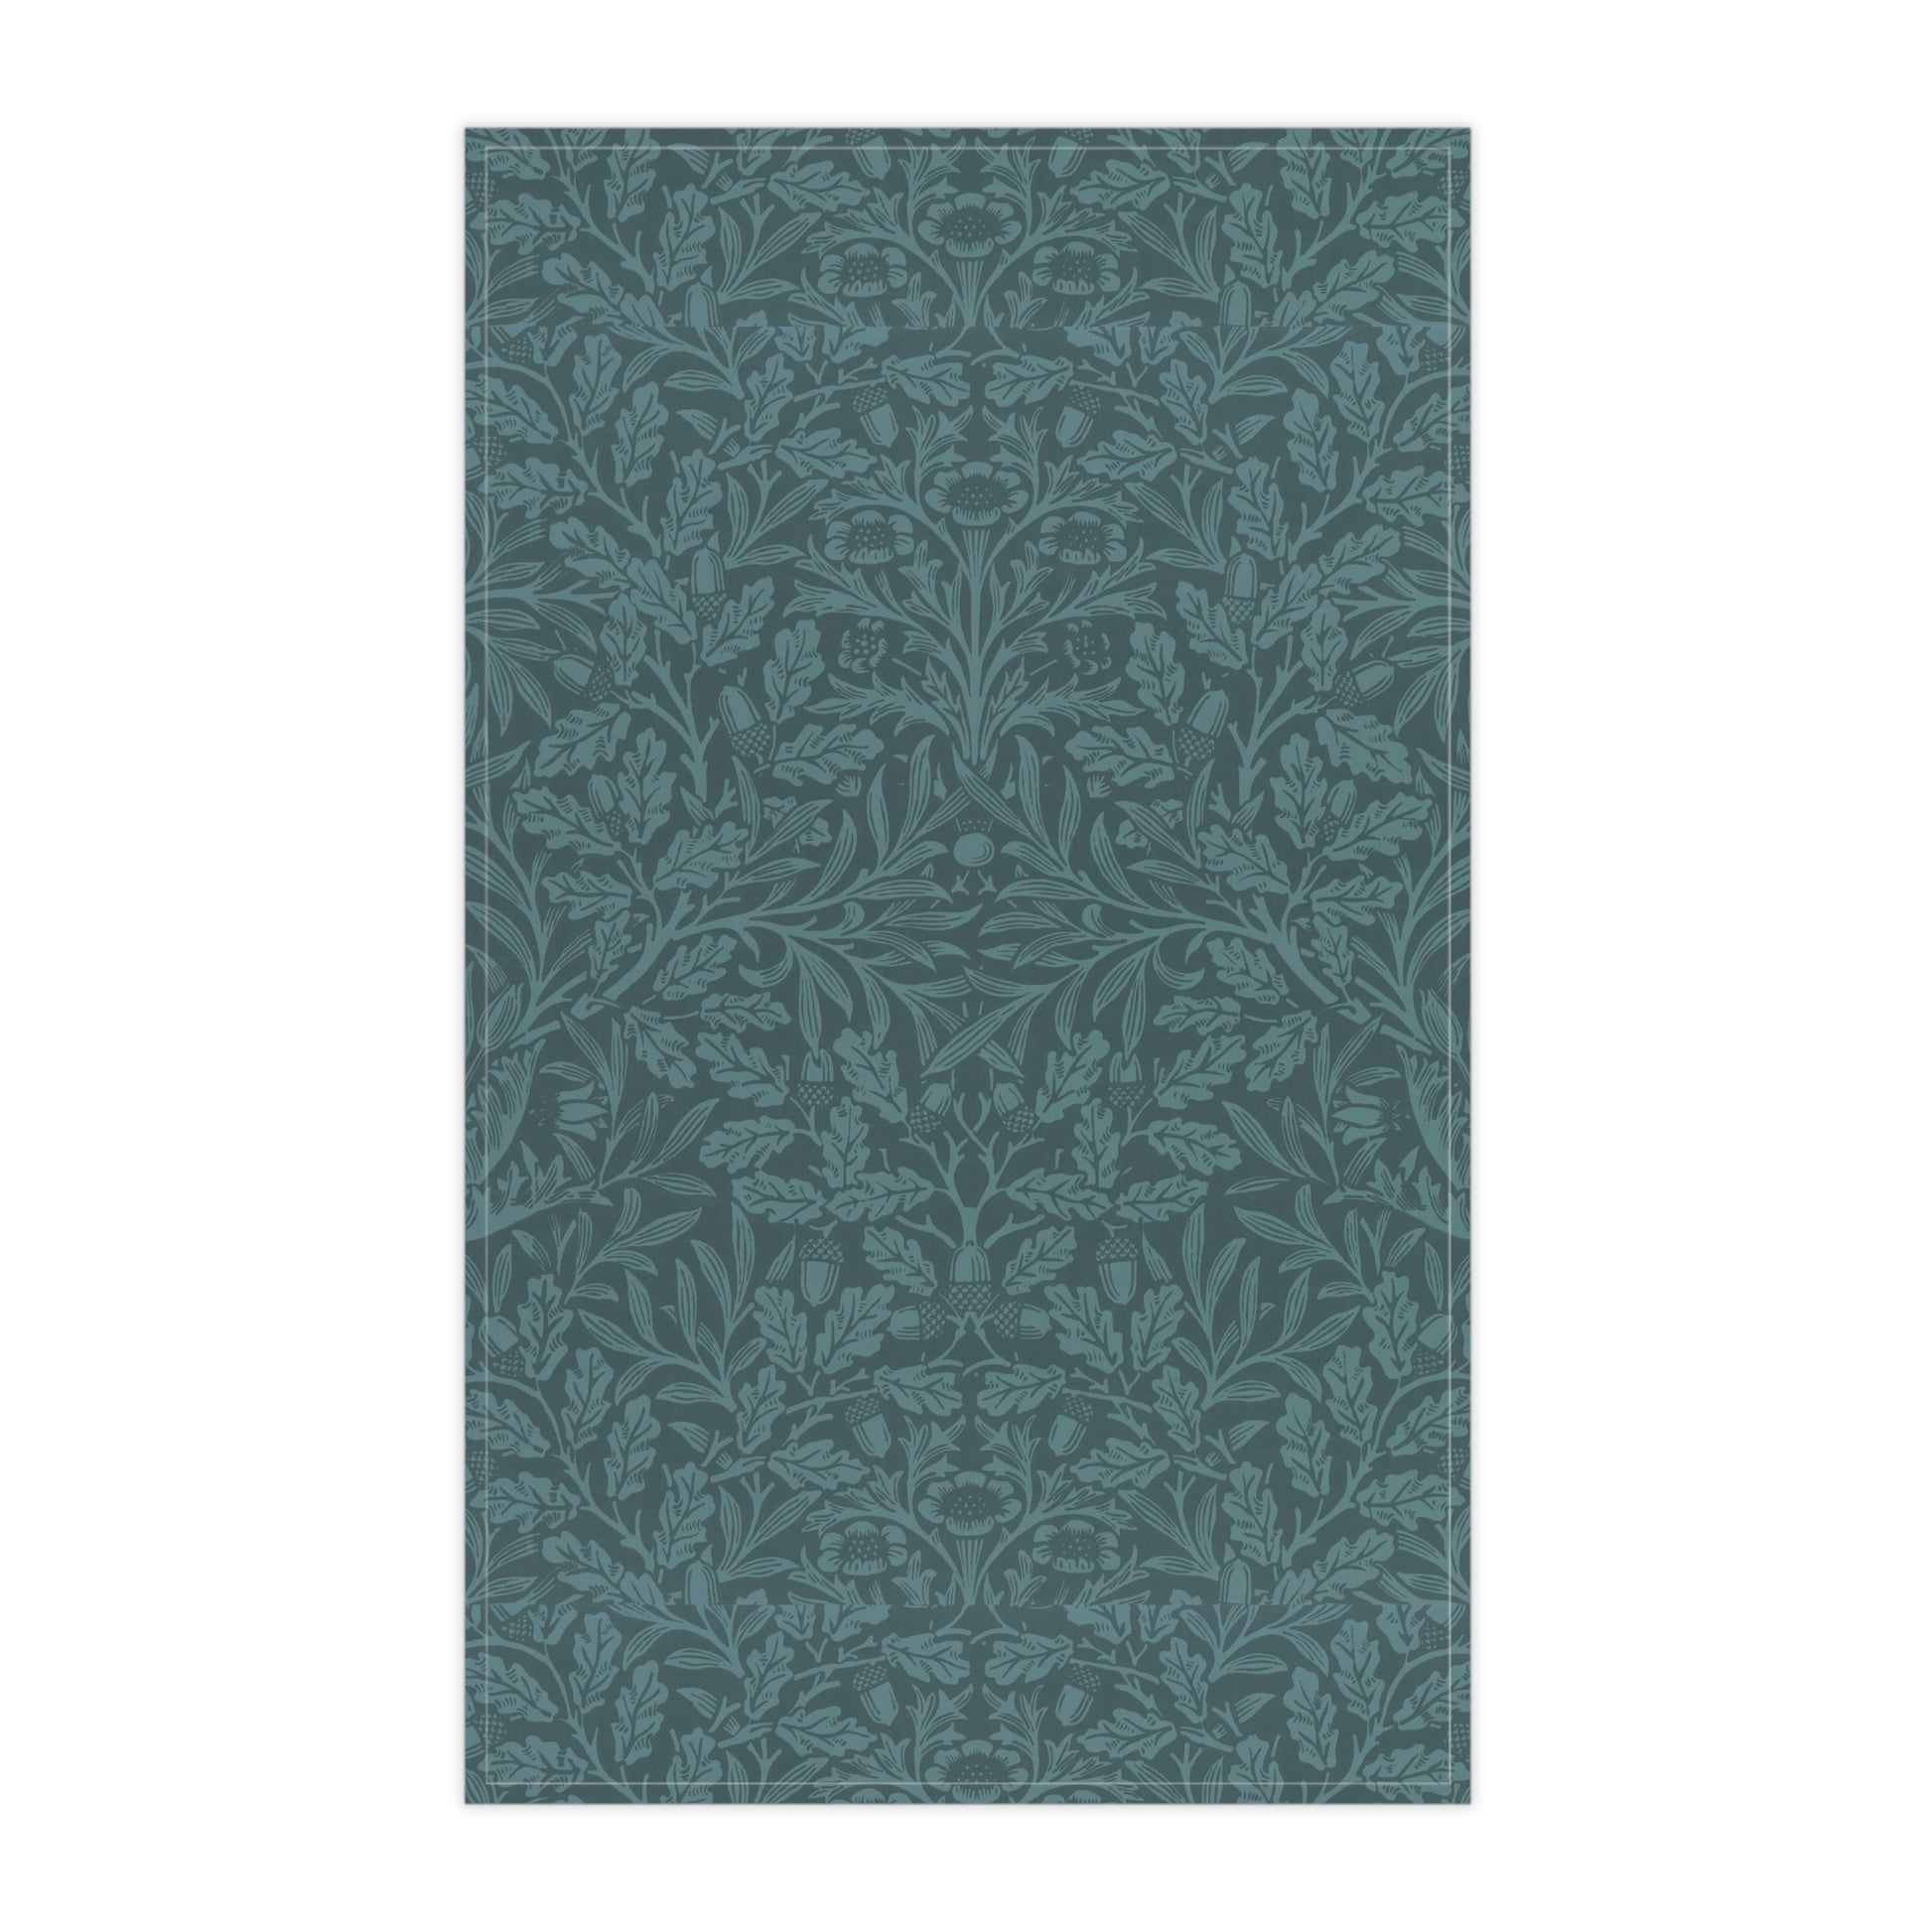 william-morris-co-kitchen-tea-towel-acorn-and-oak-leaves-collection-teal-1